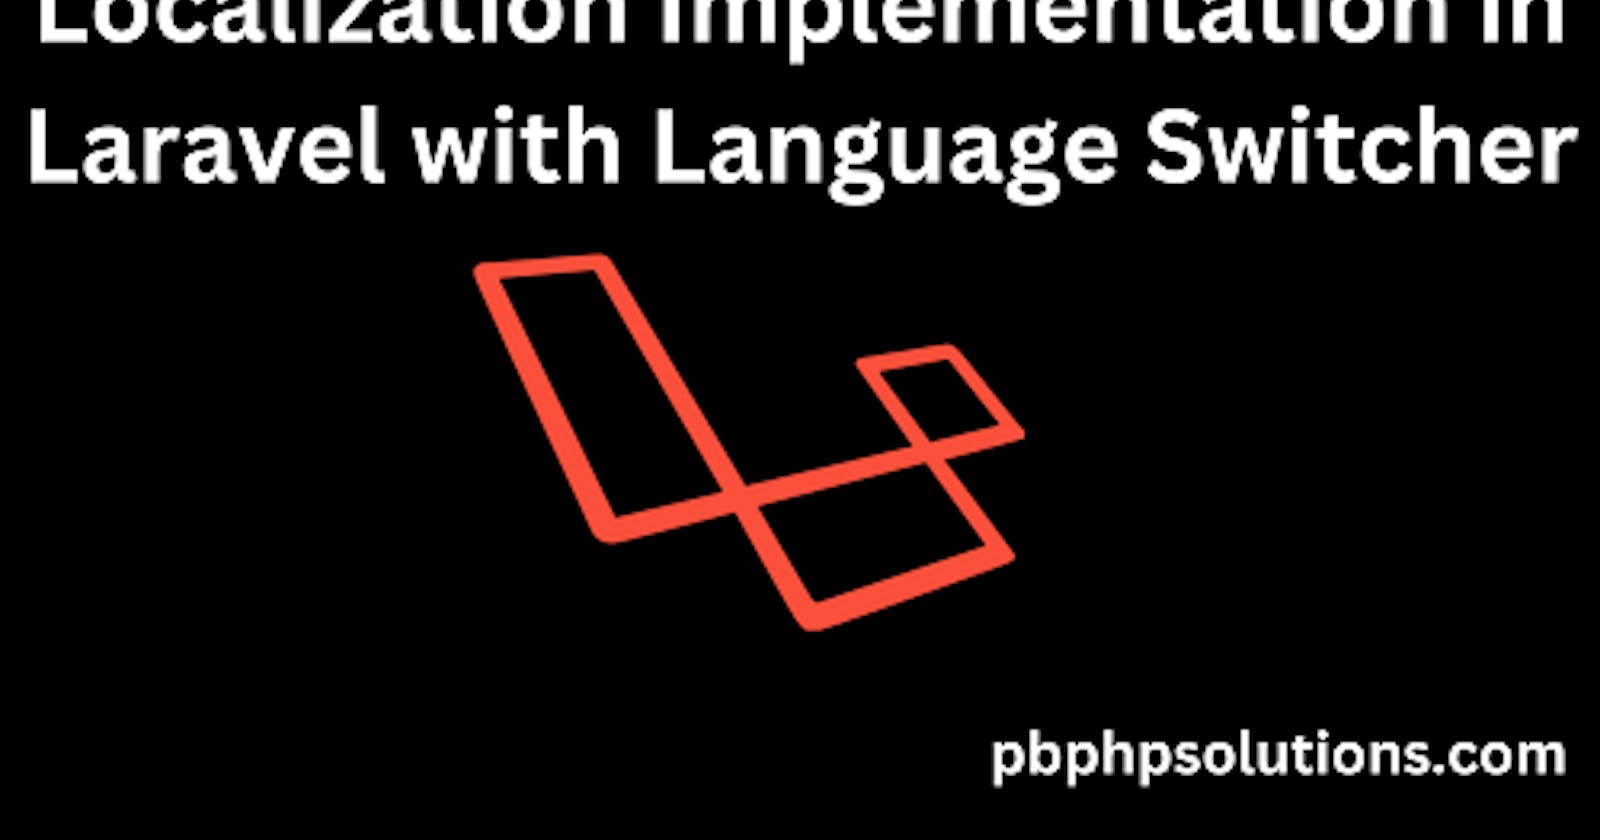 Localization Implementation in Laravel with Language Switcher